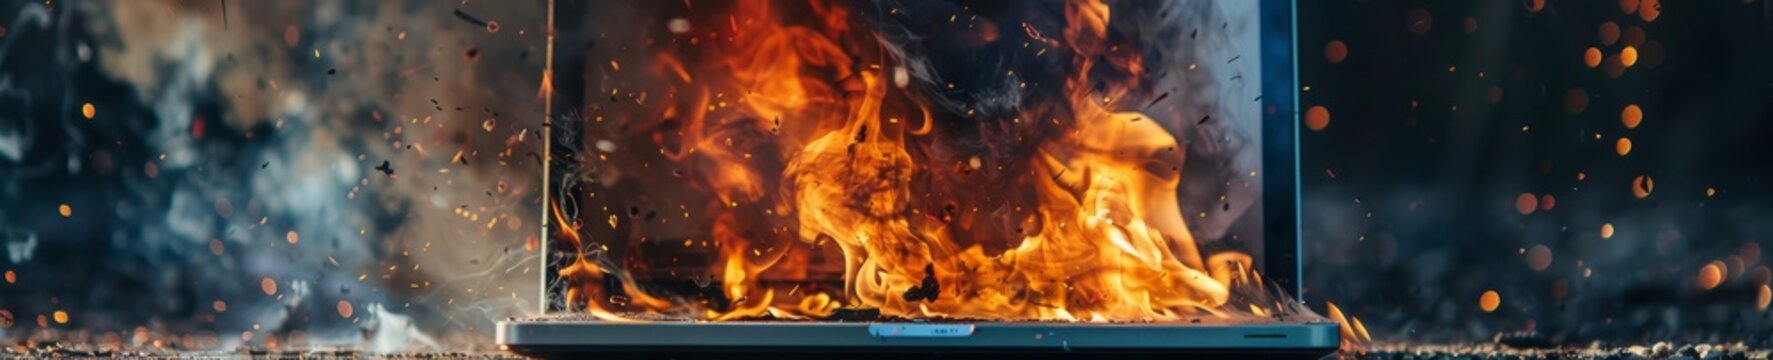 Old workhorse laptop ablaze, a smoldering pyre to the undying spirit of technology